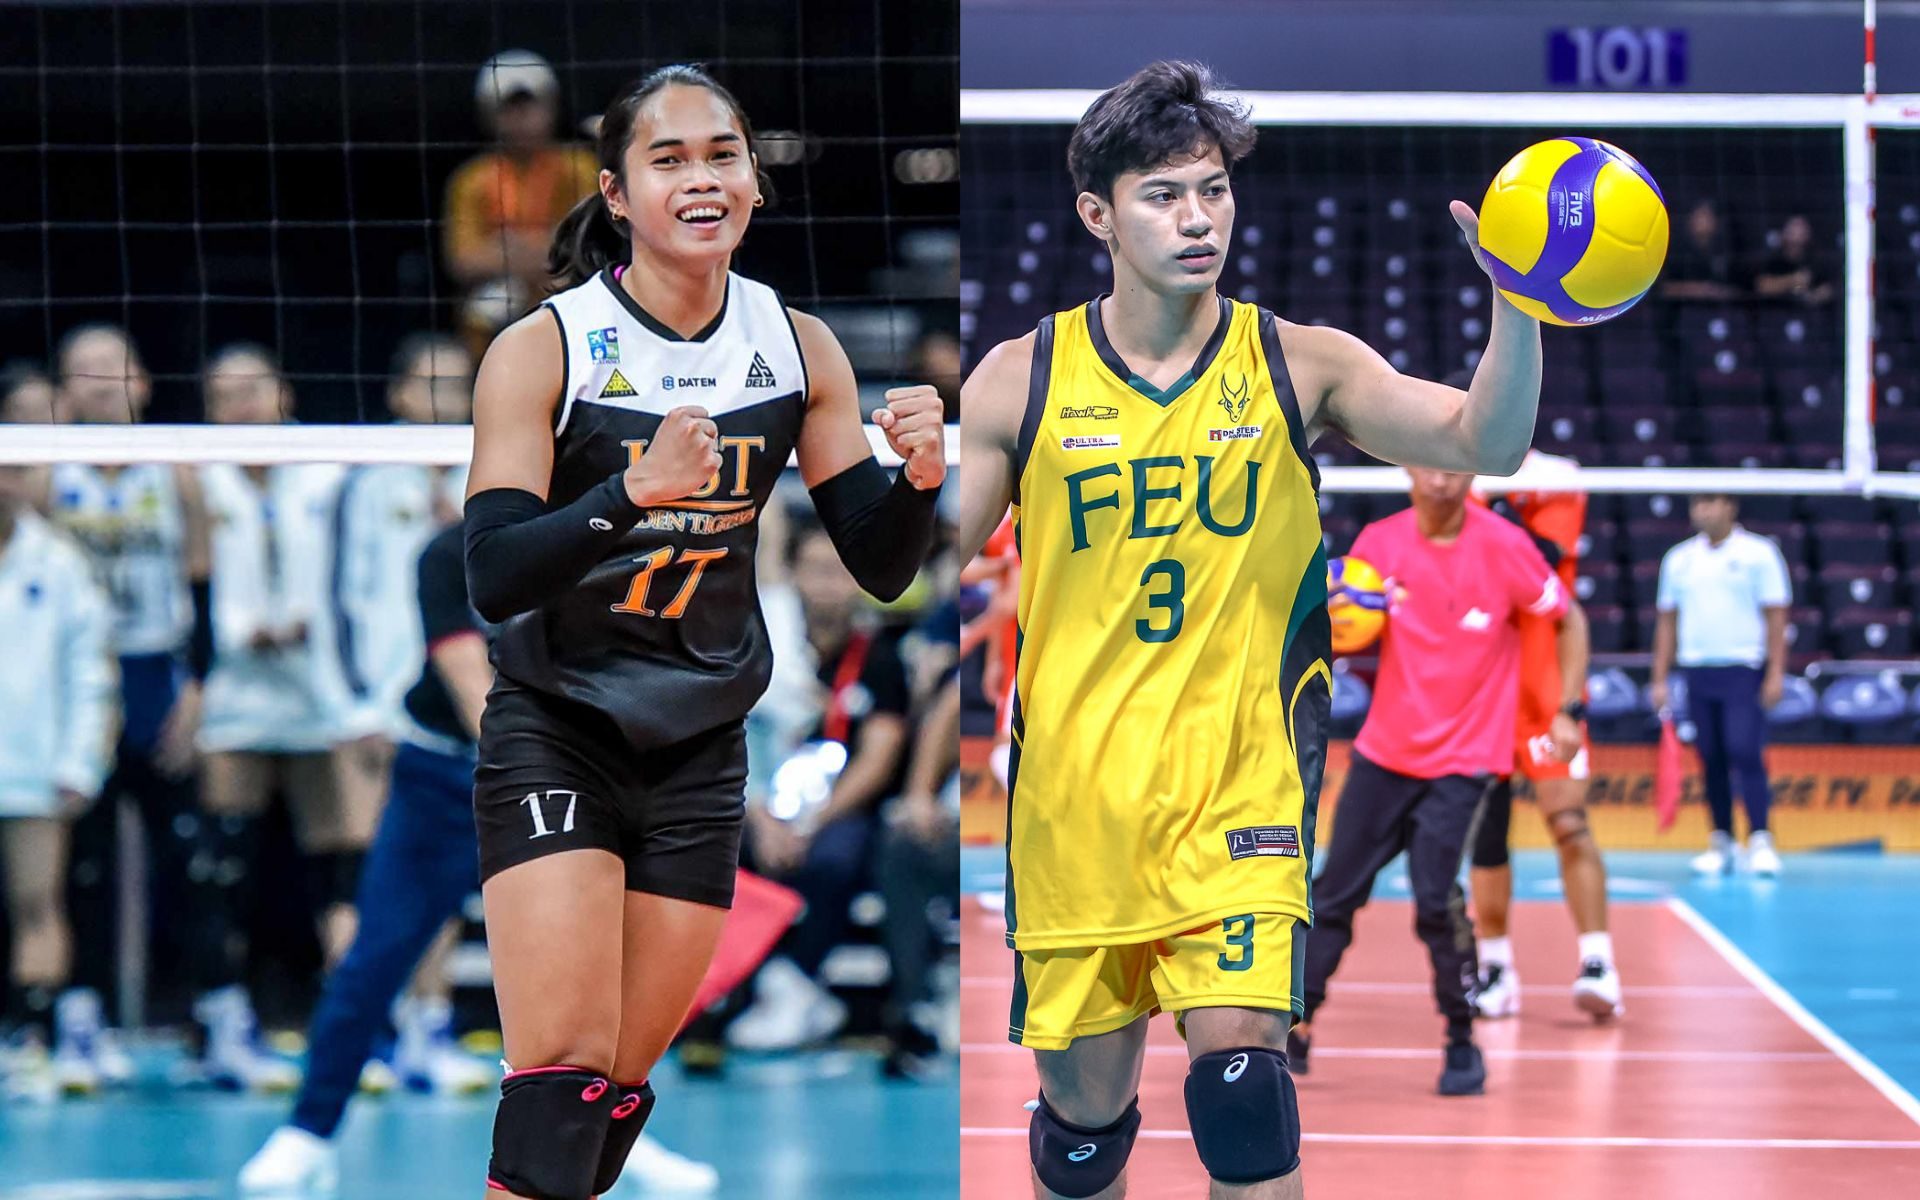 UST’s Angge Poyos, FEU’s Ariel Cacao usher rising eras as UAAP Players of the Week